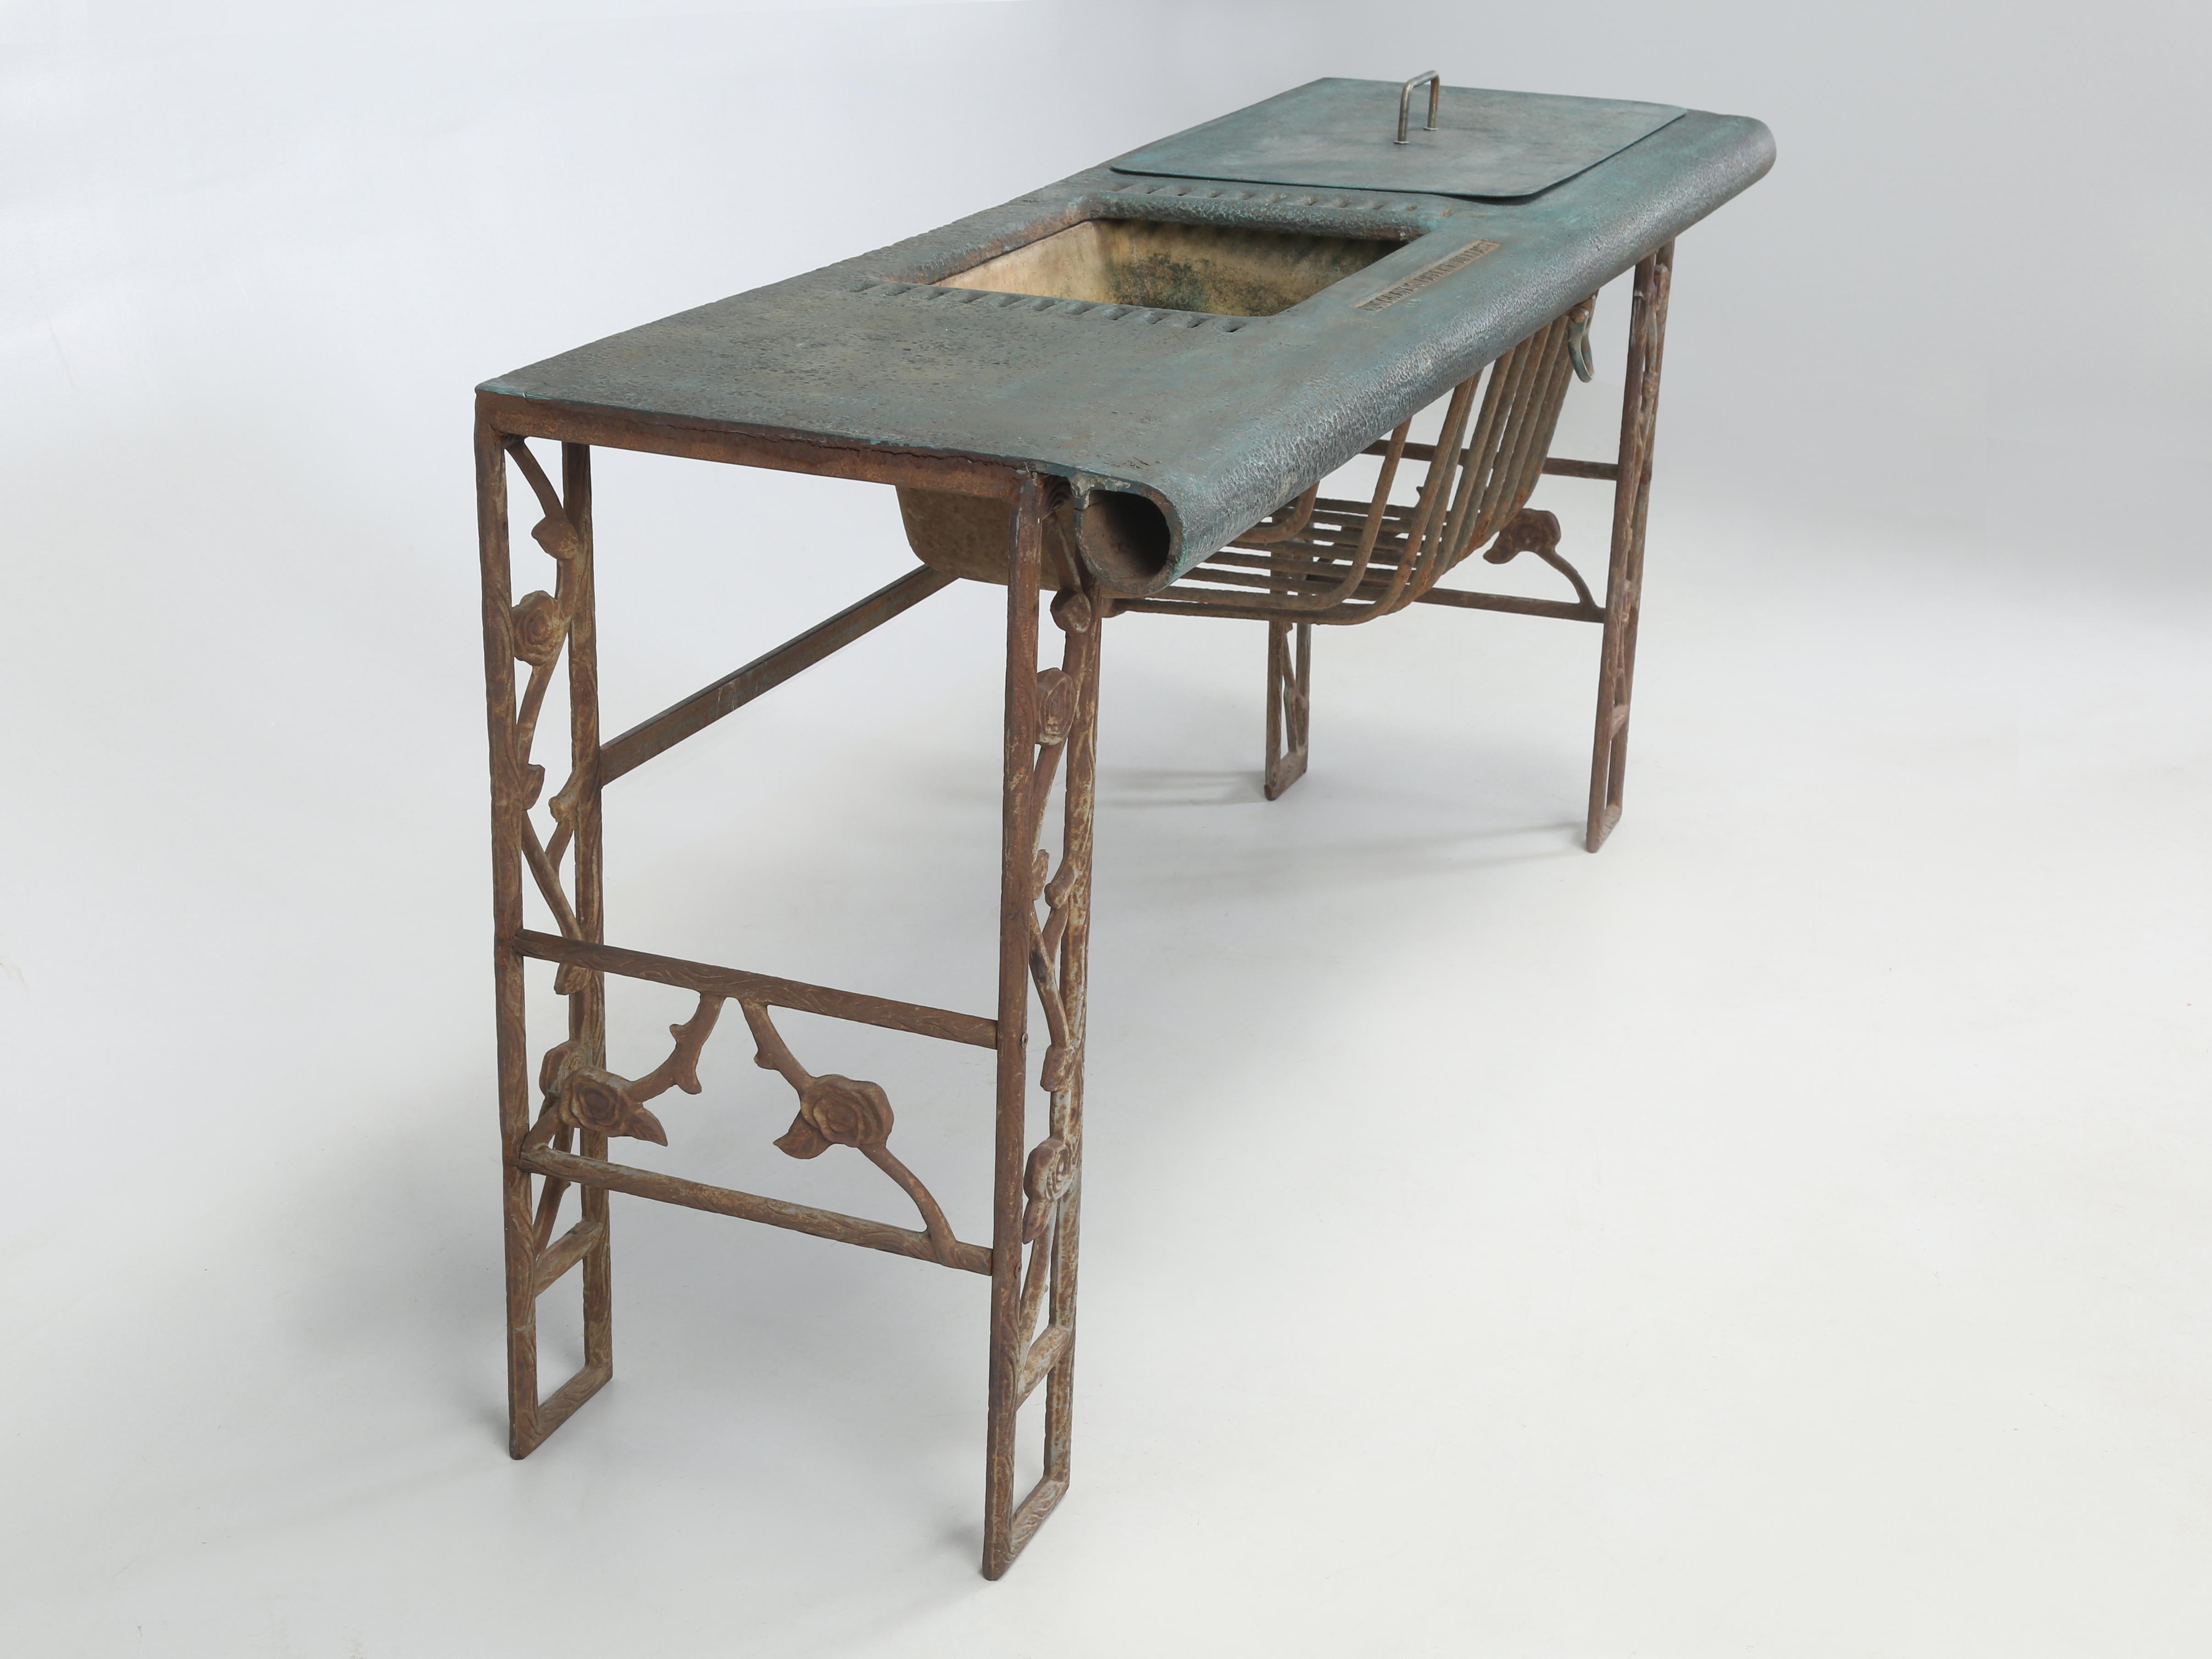 By definition this incredible Table would be called a; Cast Iron Stable Fitting manufactured by Musgrave & Co LTD. Musgrave Bros began manufacturing in Belfast in the 1840’s and had established themselves as one of the premier iron works in Ireland.